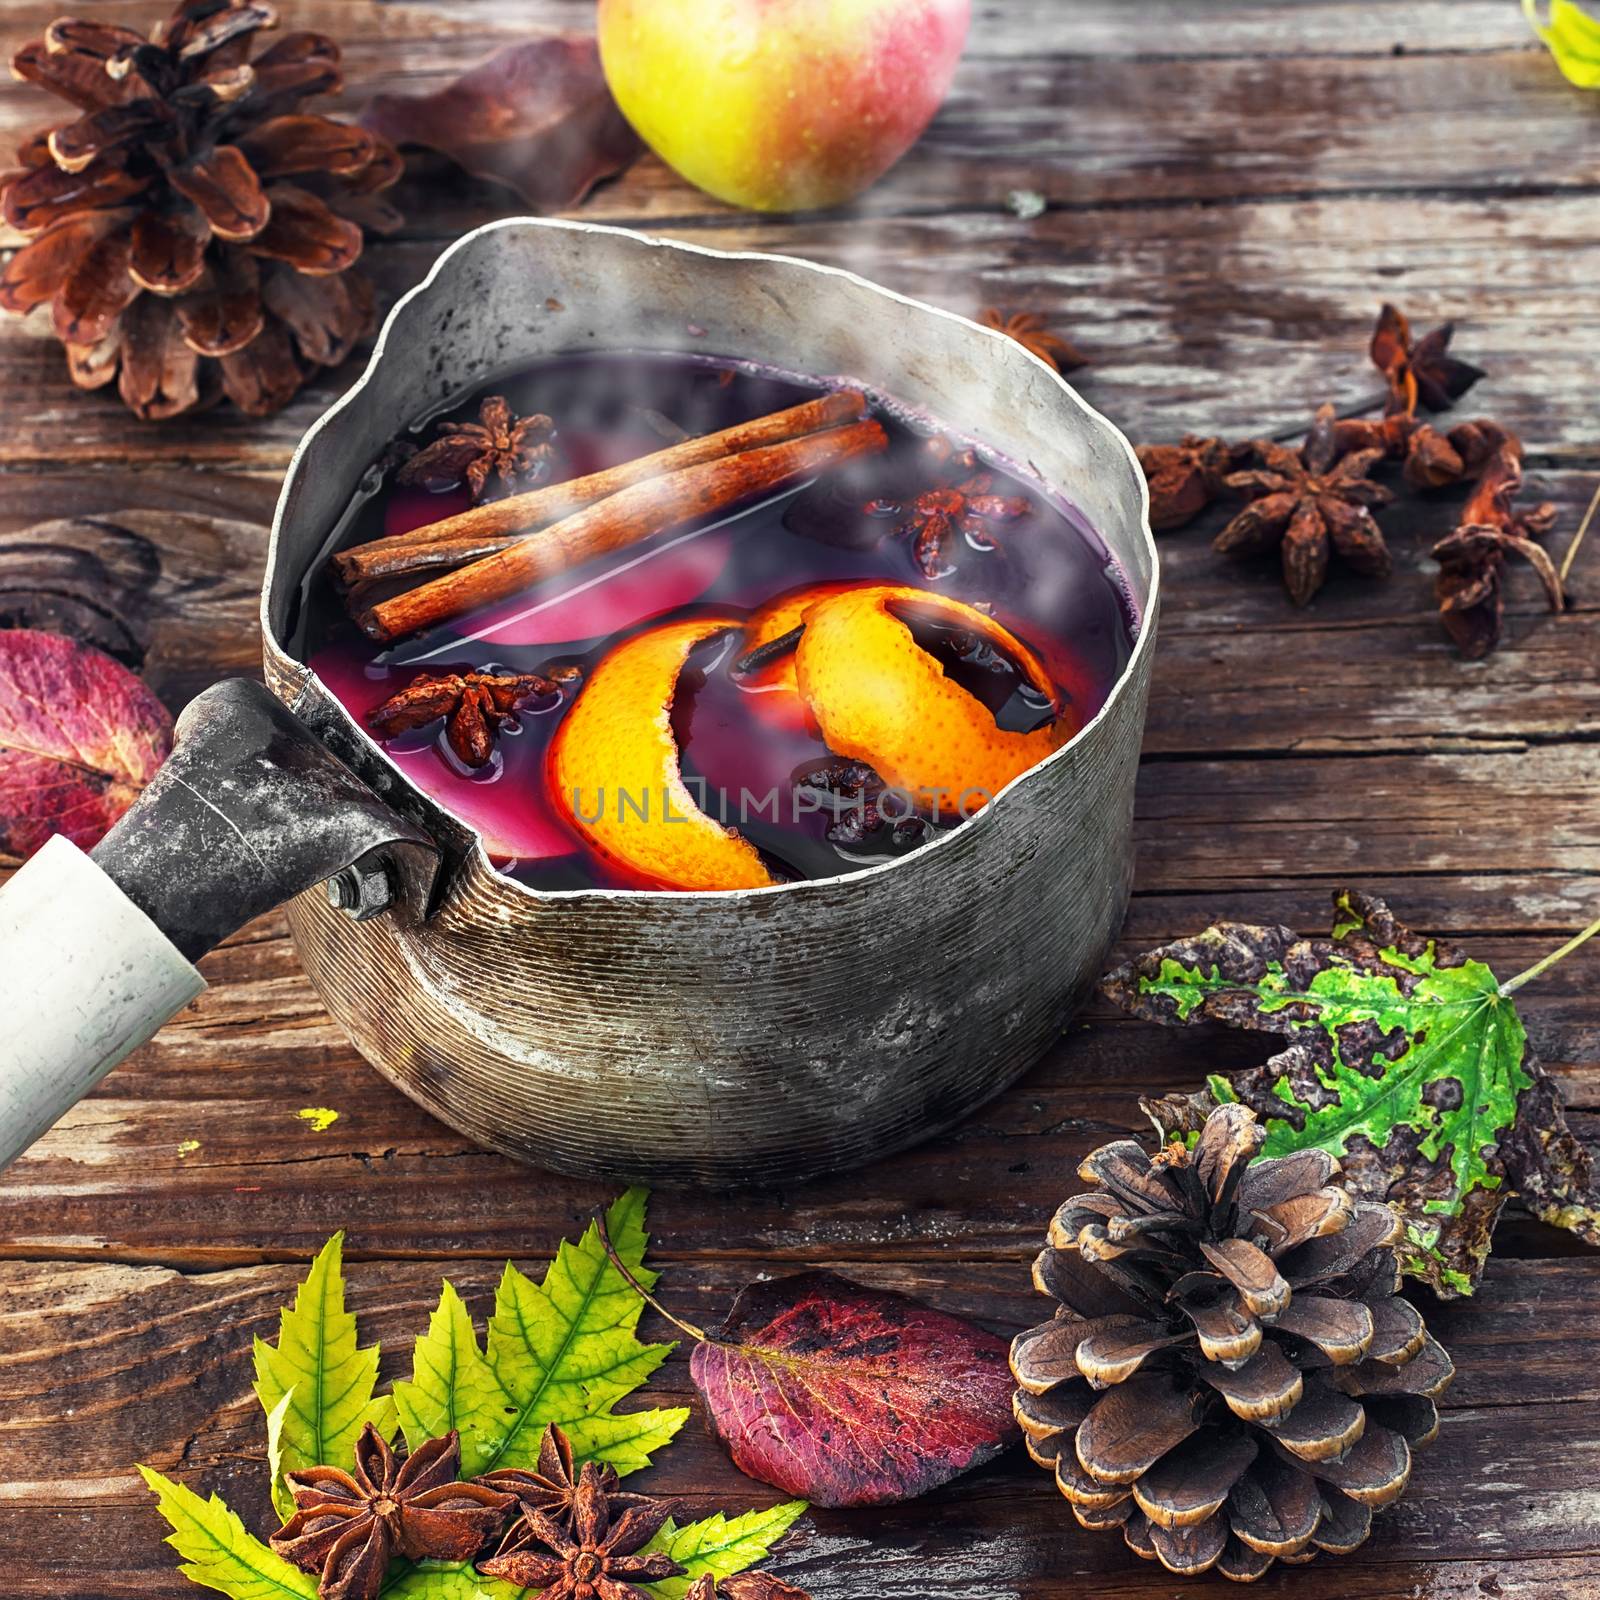 Hovering pot of sangria in the autumn still life